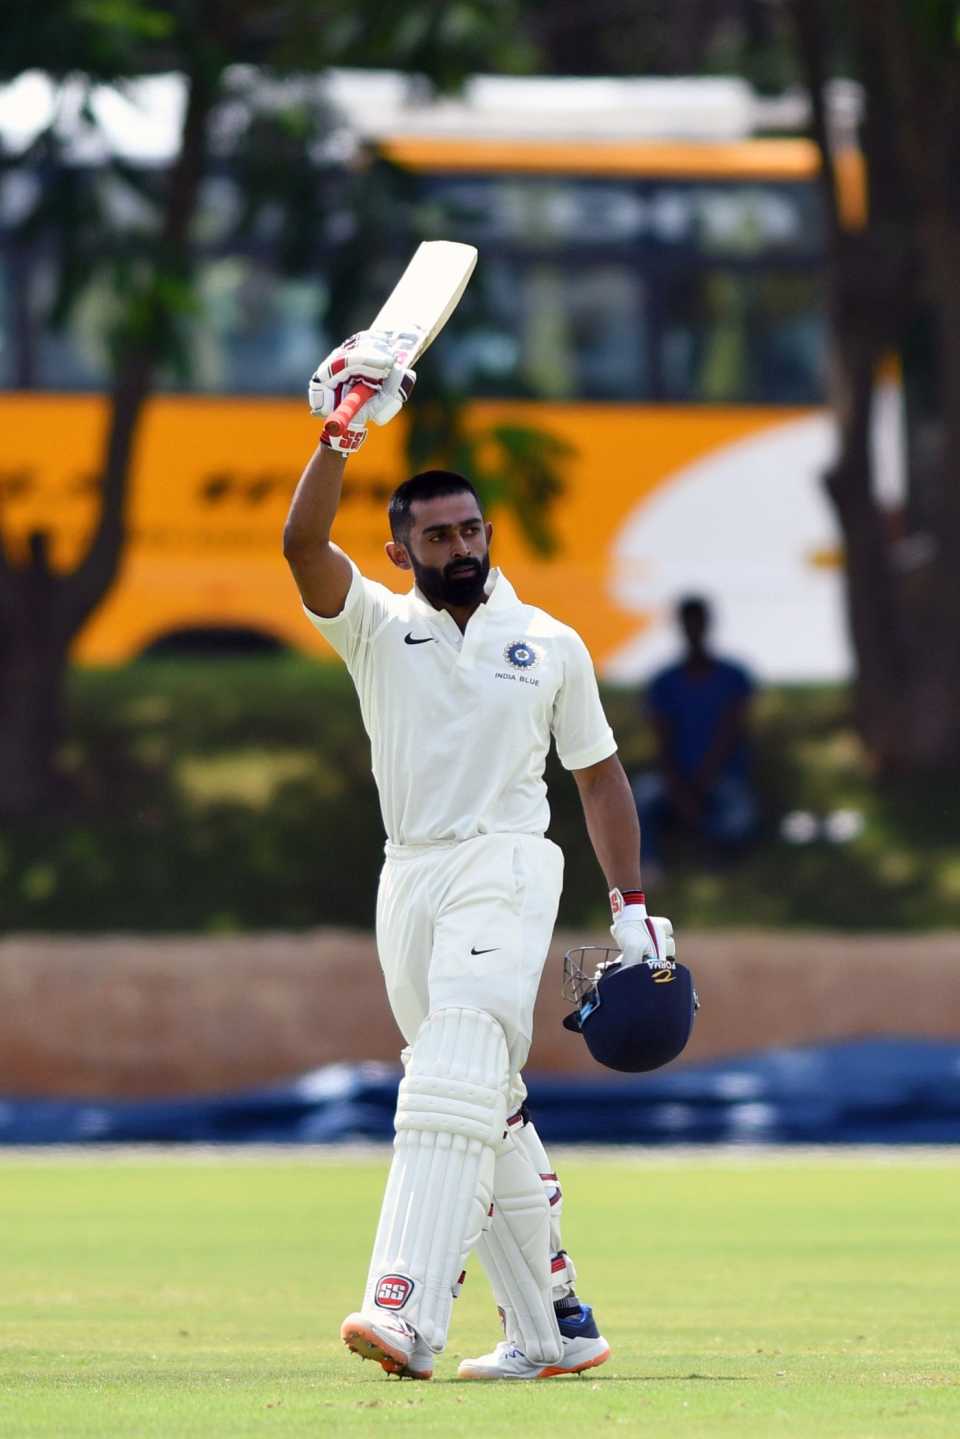 Ankit Bawne raises his bat after reaching a hundred, India Blue v India Red, Alur, 3rd day, August 25, 2019